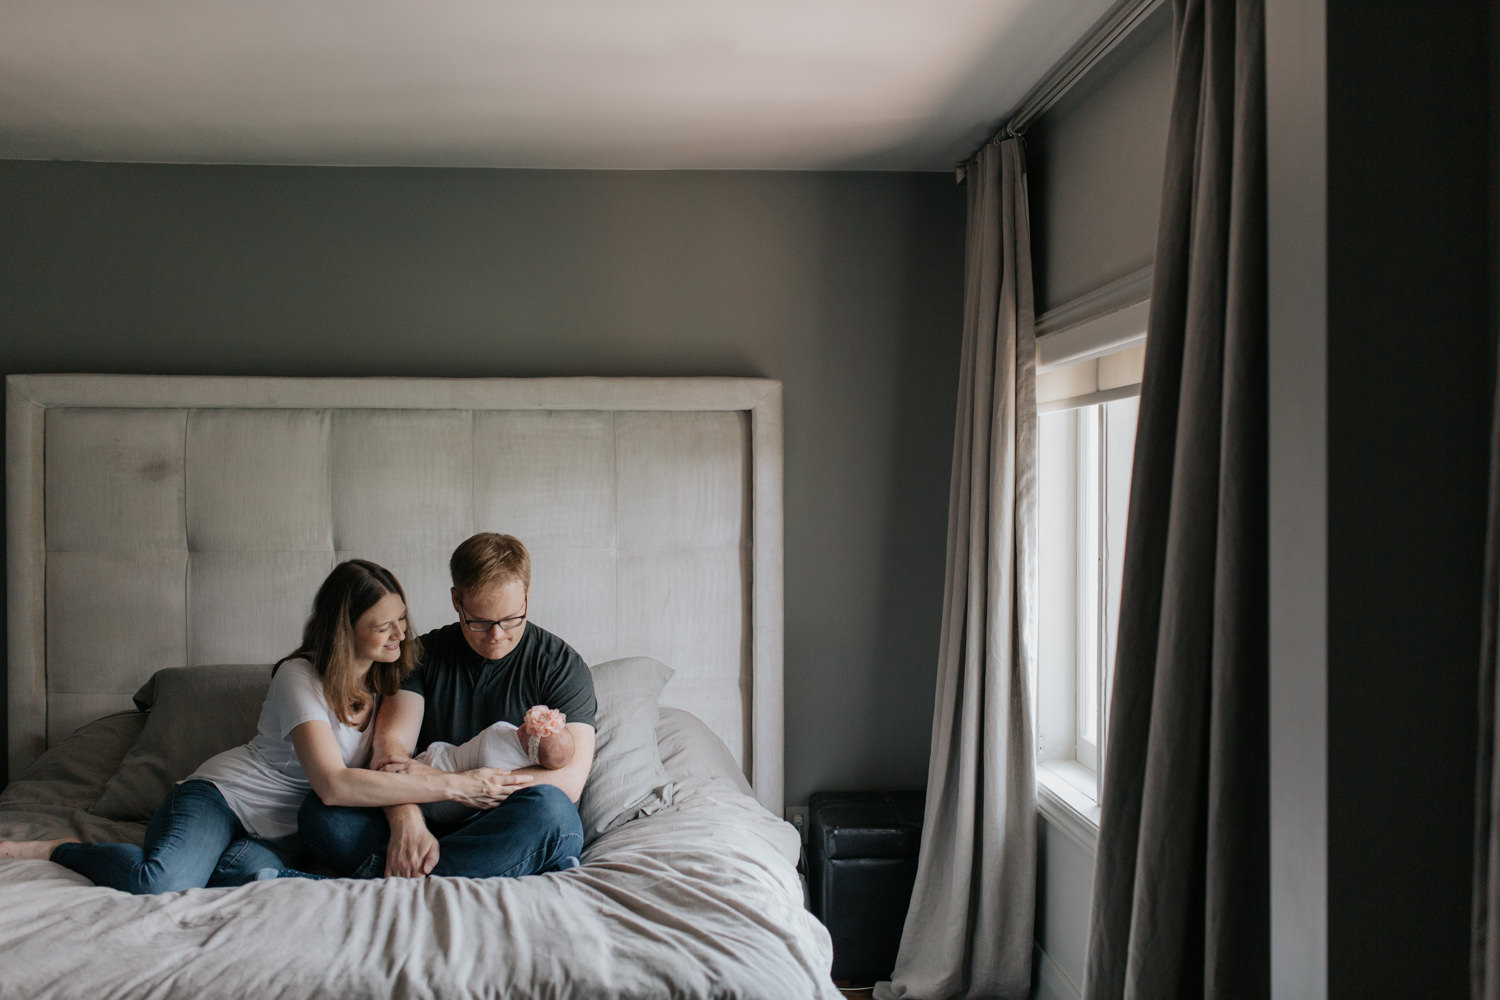 family of 3, new parents sitting on bed, dad holding 2 week old swaddled baby girl as mom snuggles next to husband smiling at daughter - Newmarket Lifestyle Photography